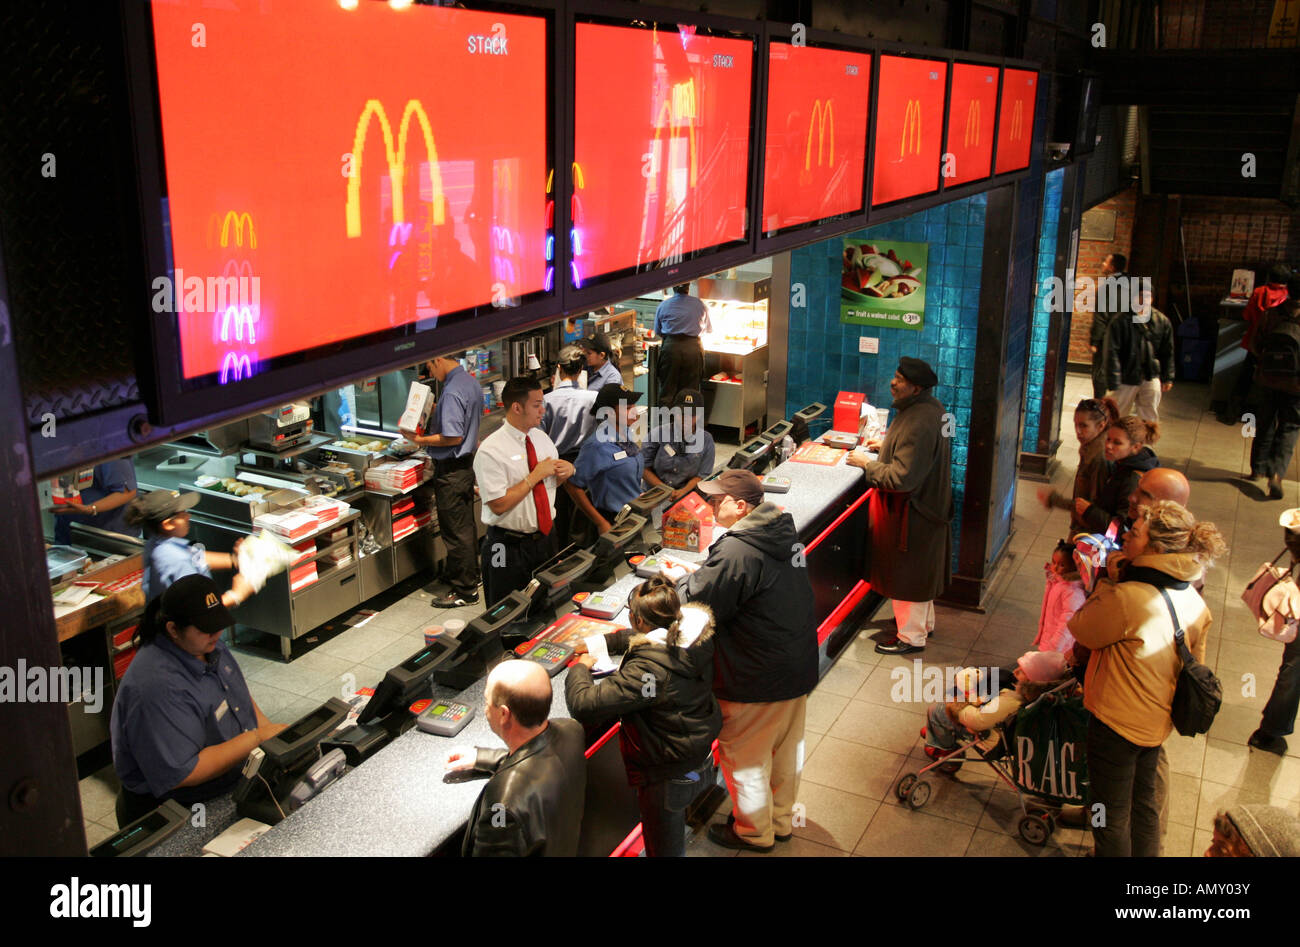 People at a McDonalds restaurant in New York, USA Stock Photo